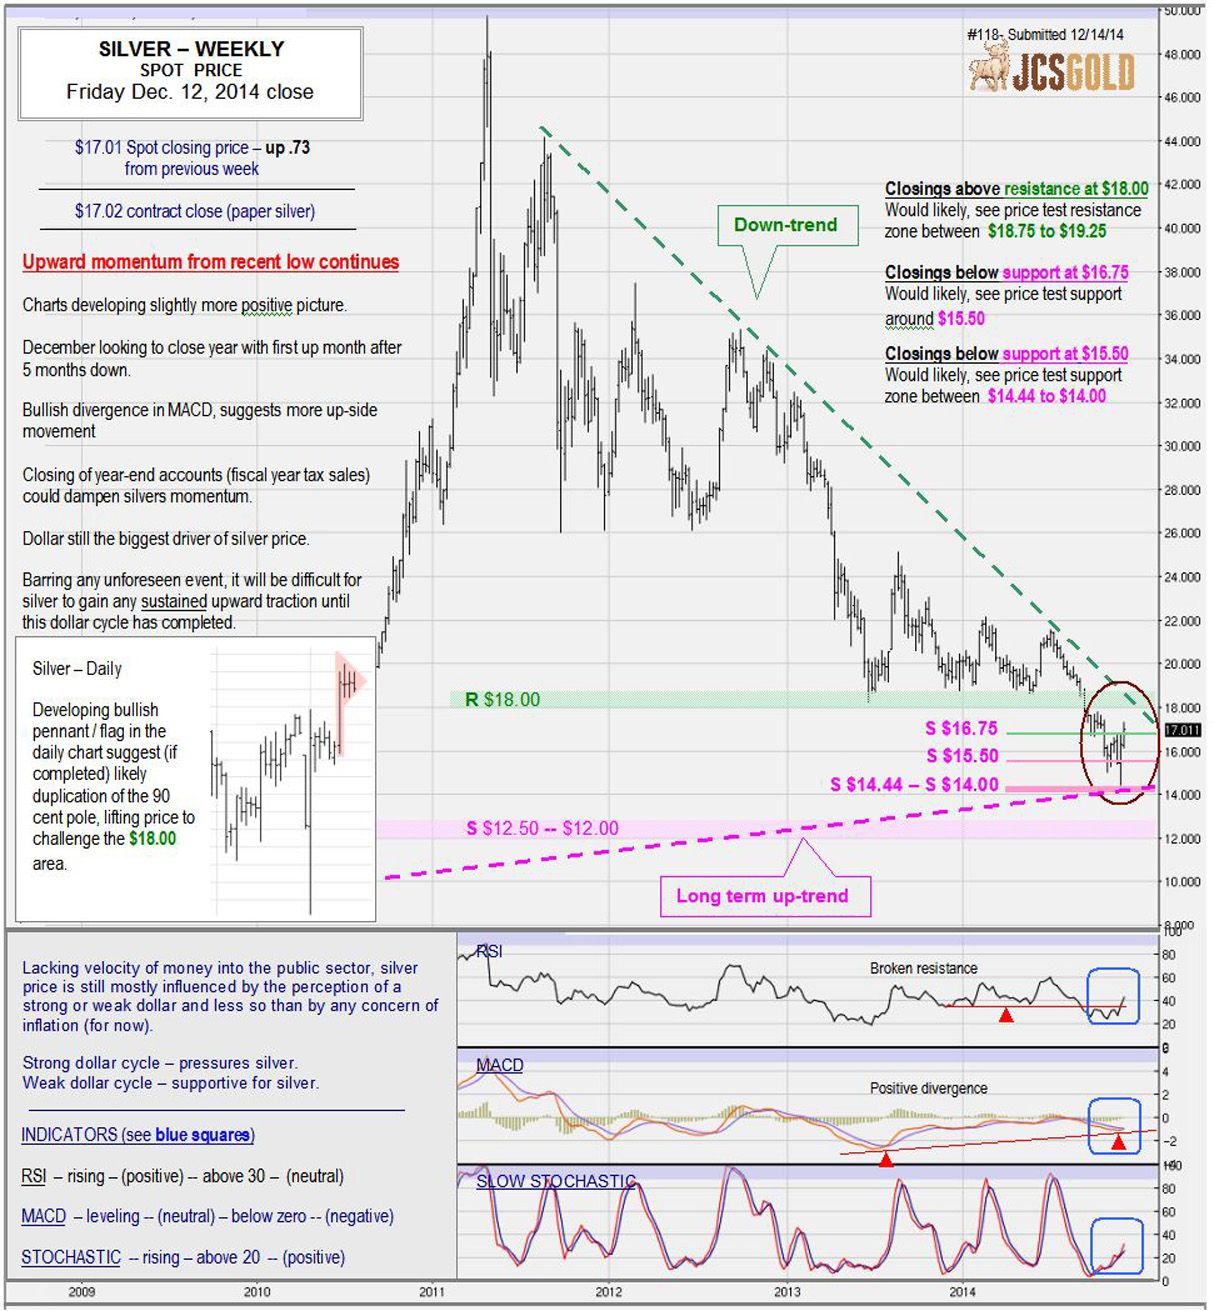 Dec 12, 2014 chart & commentary